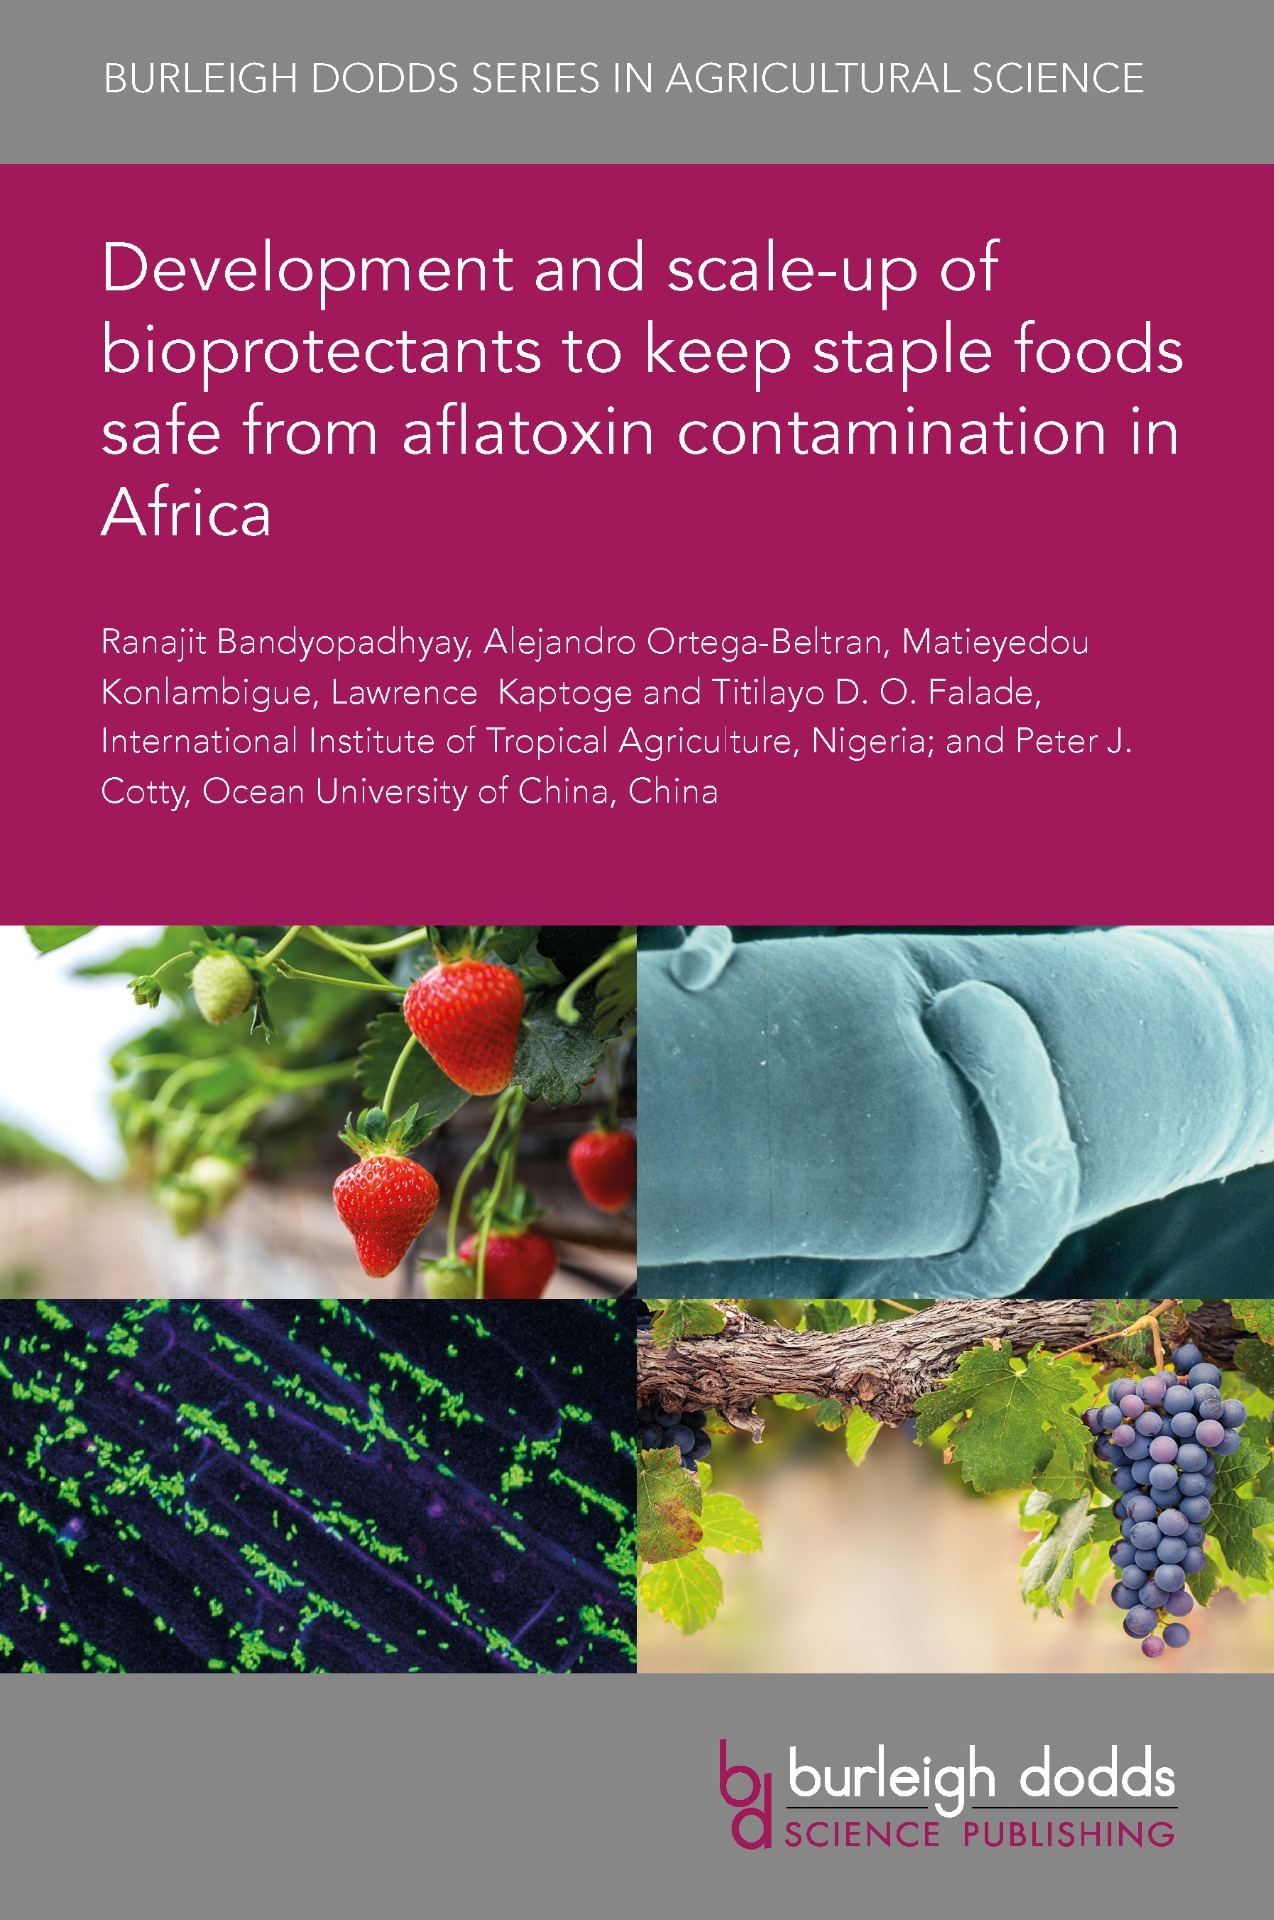 Development and scale-up of bioprotectants to keep staple foods safe from aflatoxin contamination in Africa